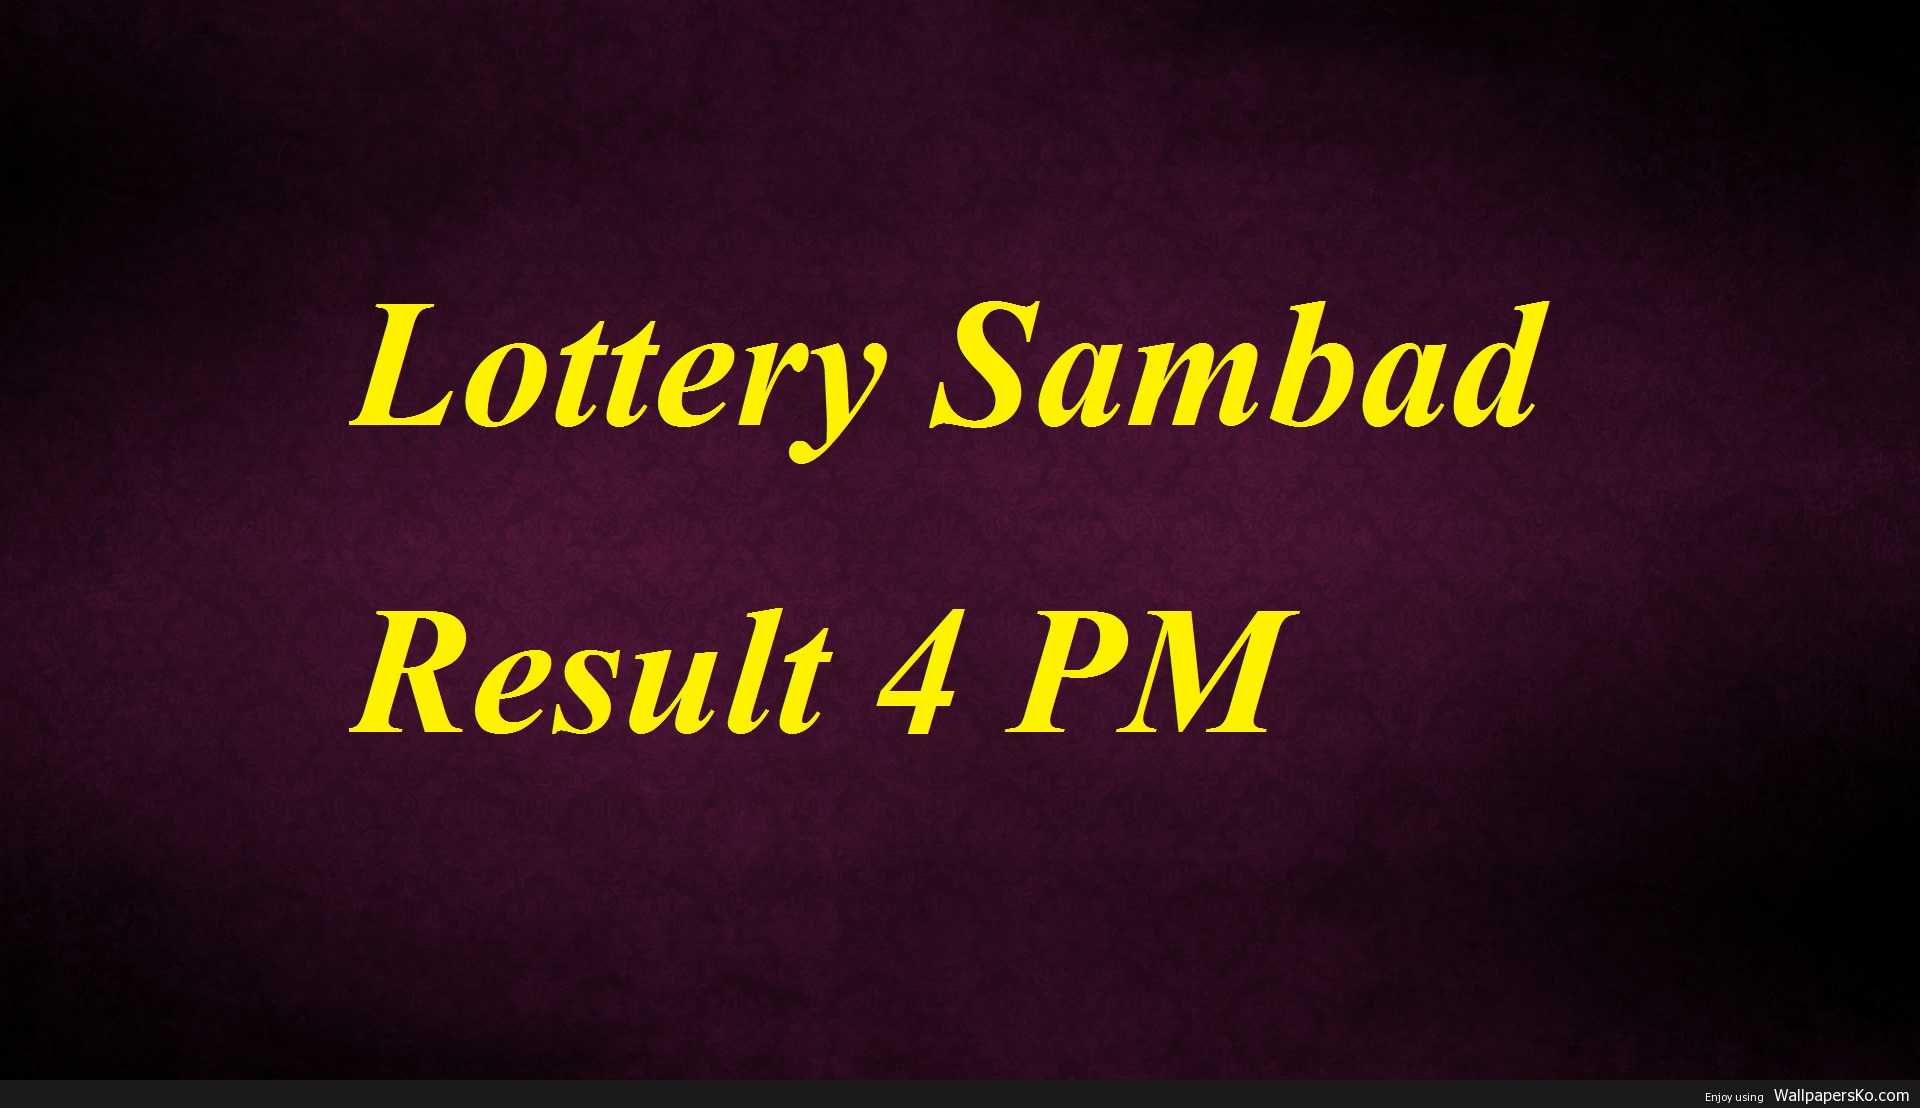 Sikkim lottery Sambad 4 pm result today